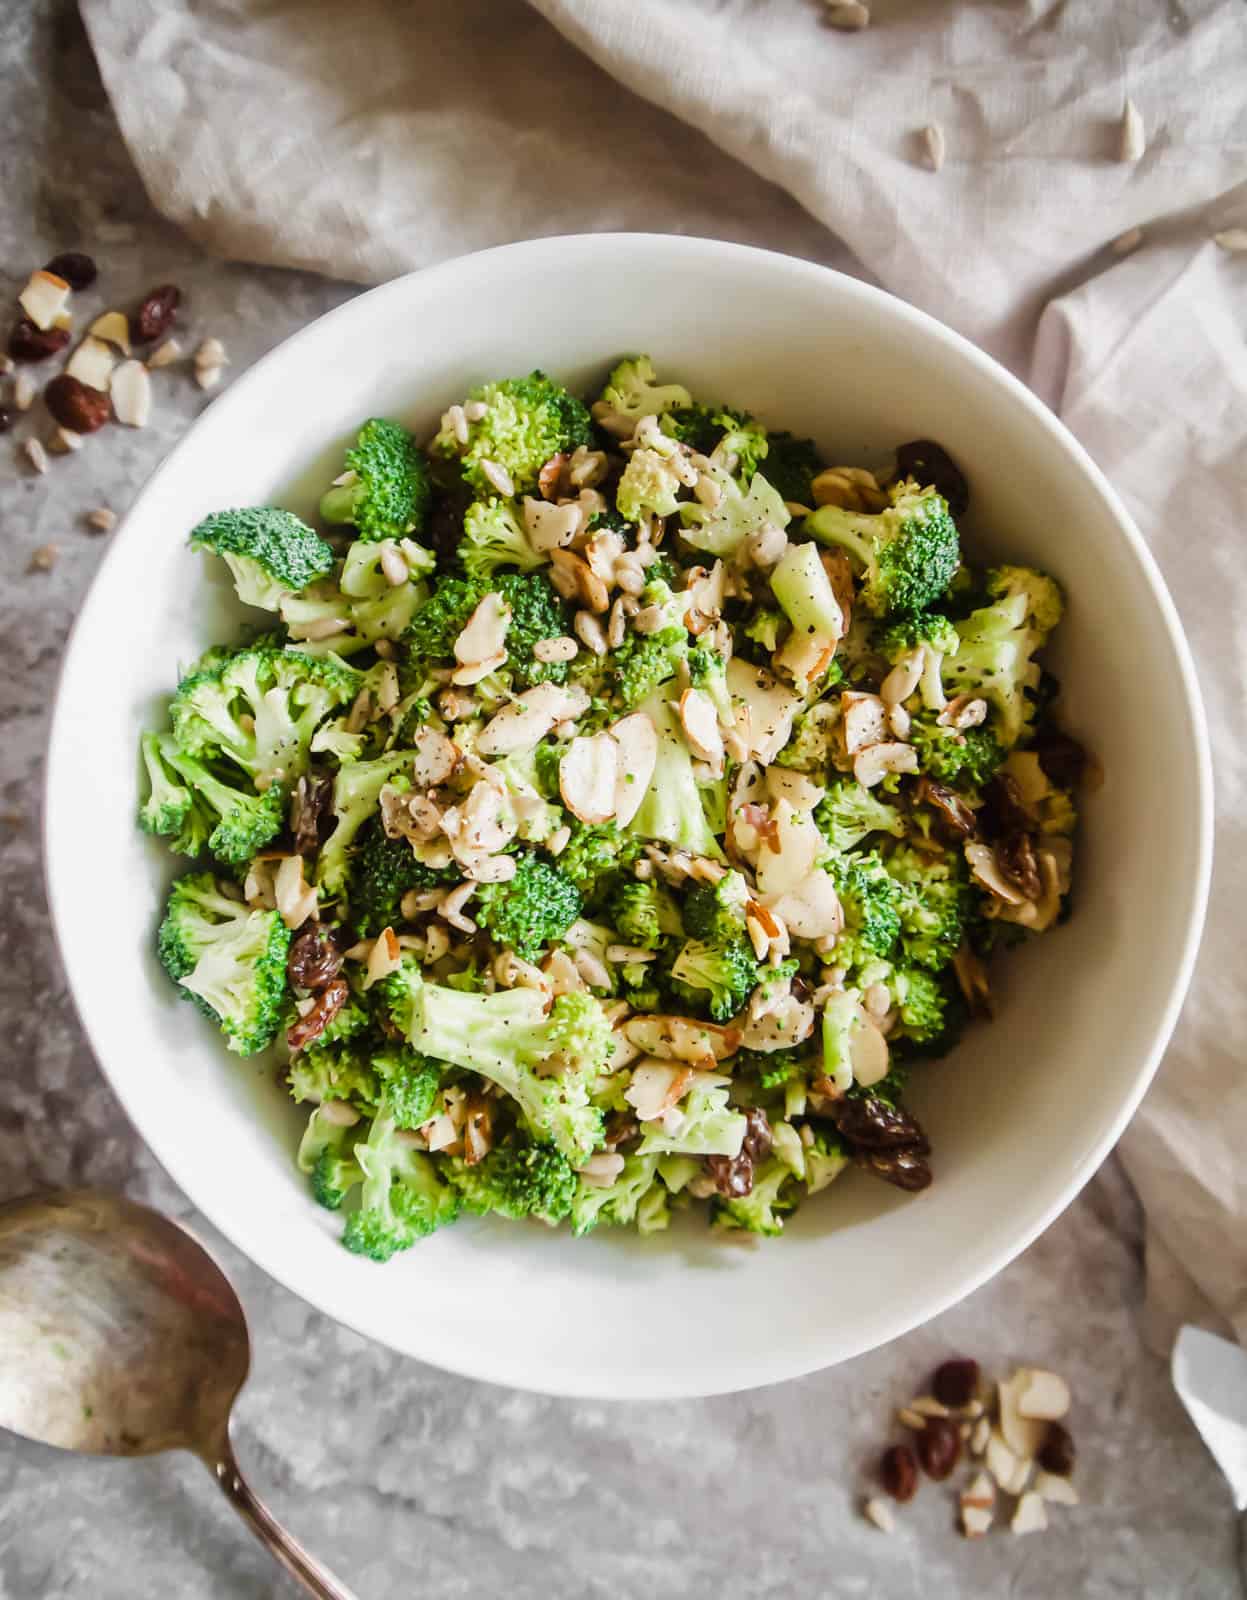 The whole dairy-free broccoli salad mixed together in a large bowl.